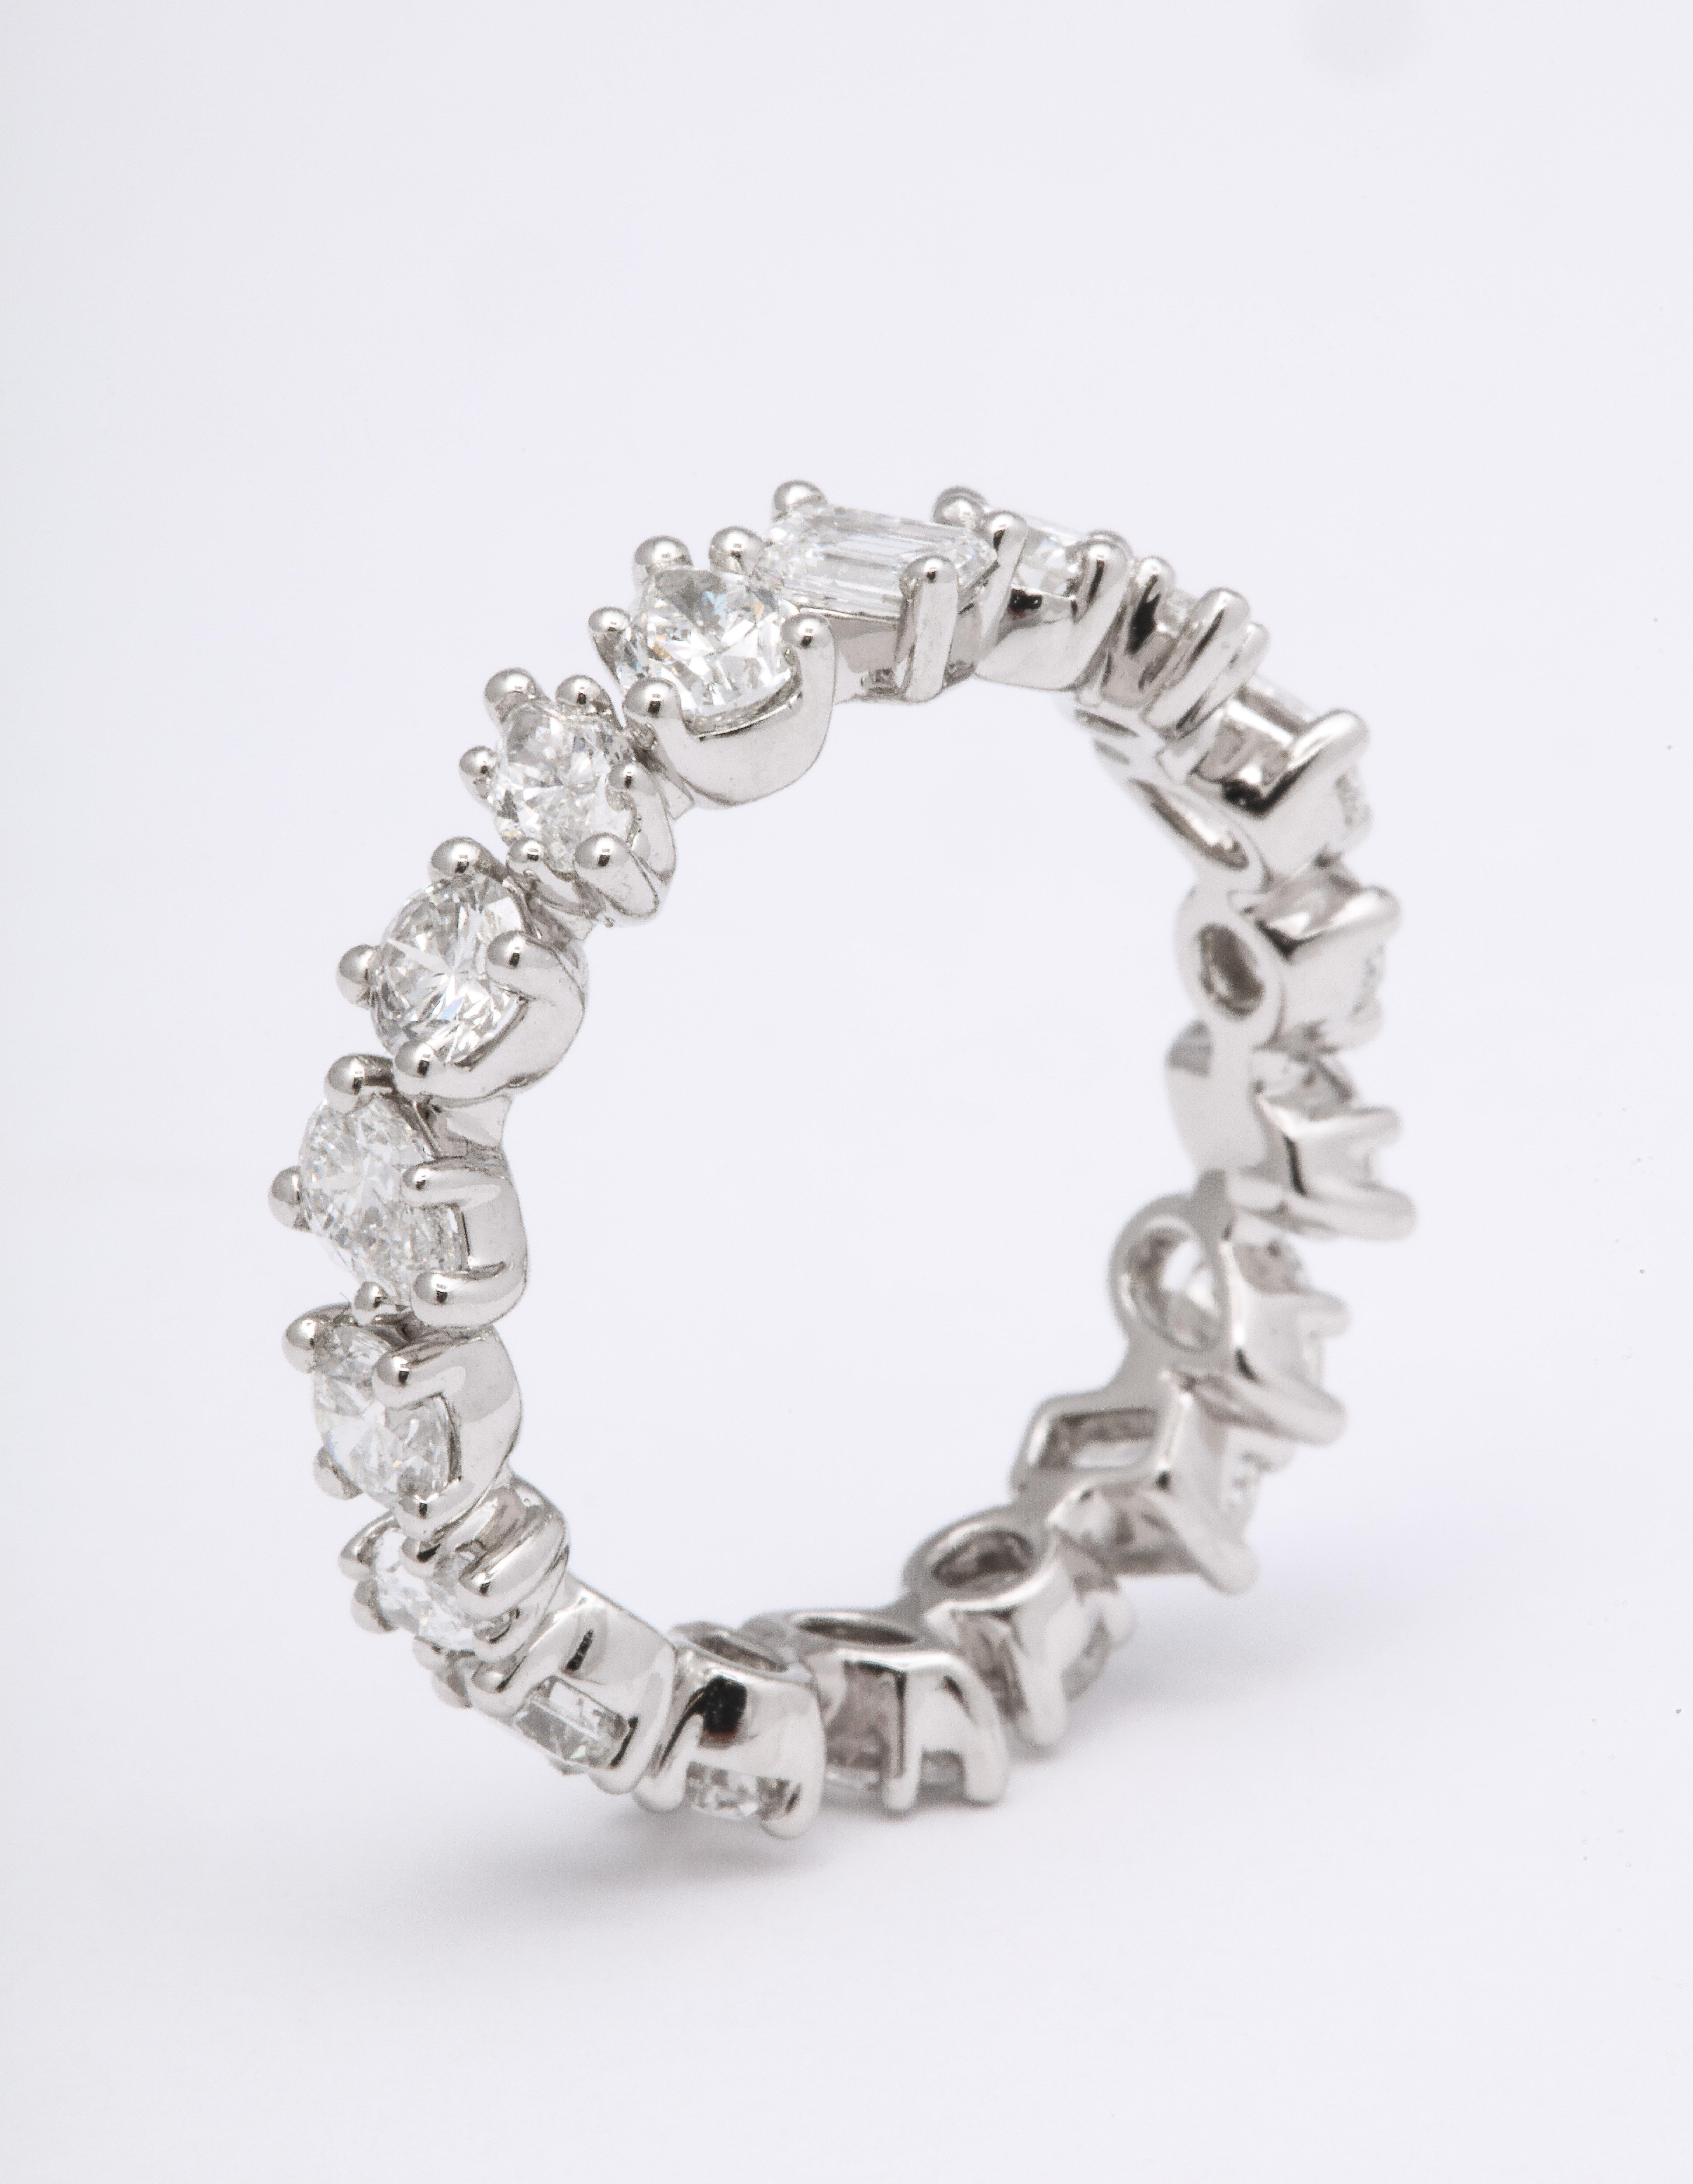 
Fabulous worn alone or stacked.

Eternity band featuring white round, pear shape, marquise and emerald cut diamonds. 

2.66 carats of diamonds set in platinum

Currently a size 6, but can be slightly adjusted or ordered in any size. 

4.8/4.9 mm